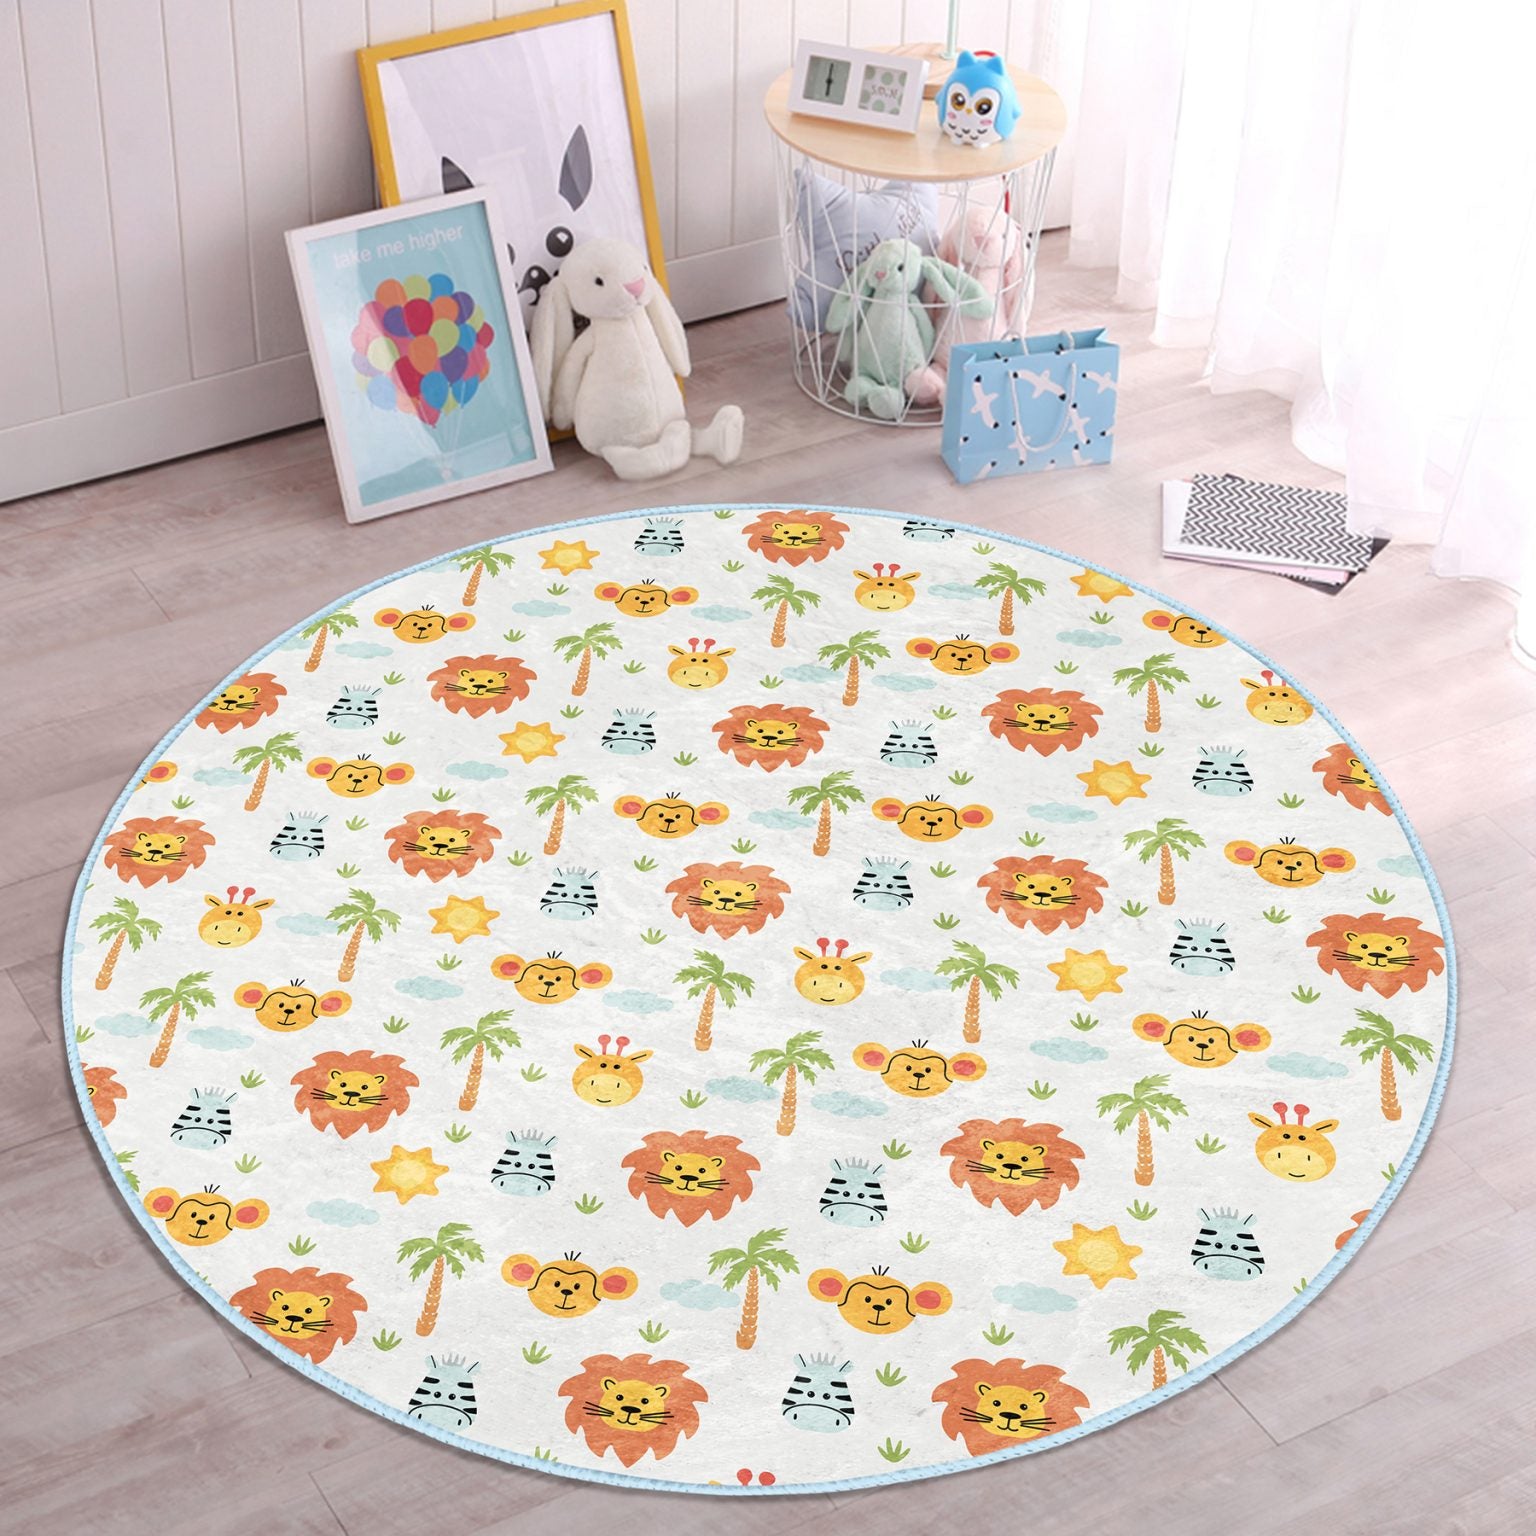 Whimsical Lion and Monkey Design Area Rug for Kids